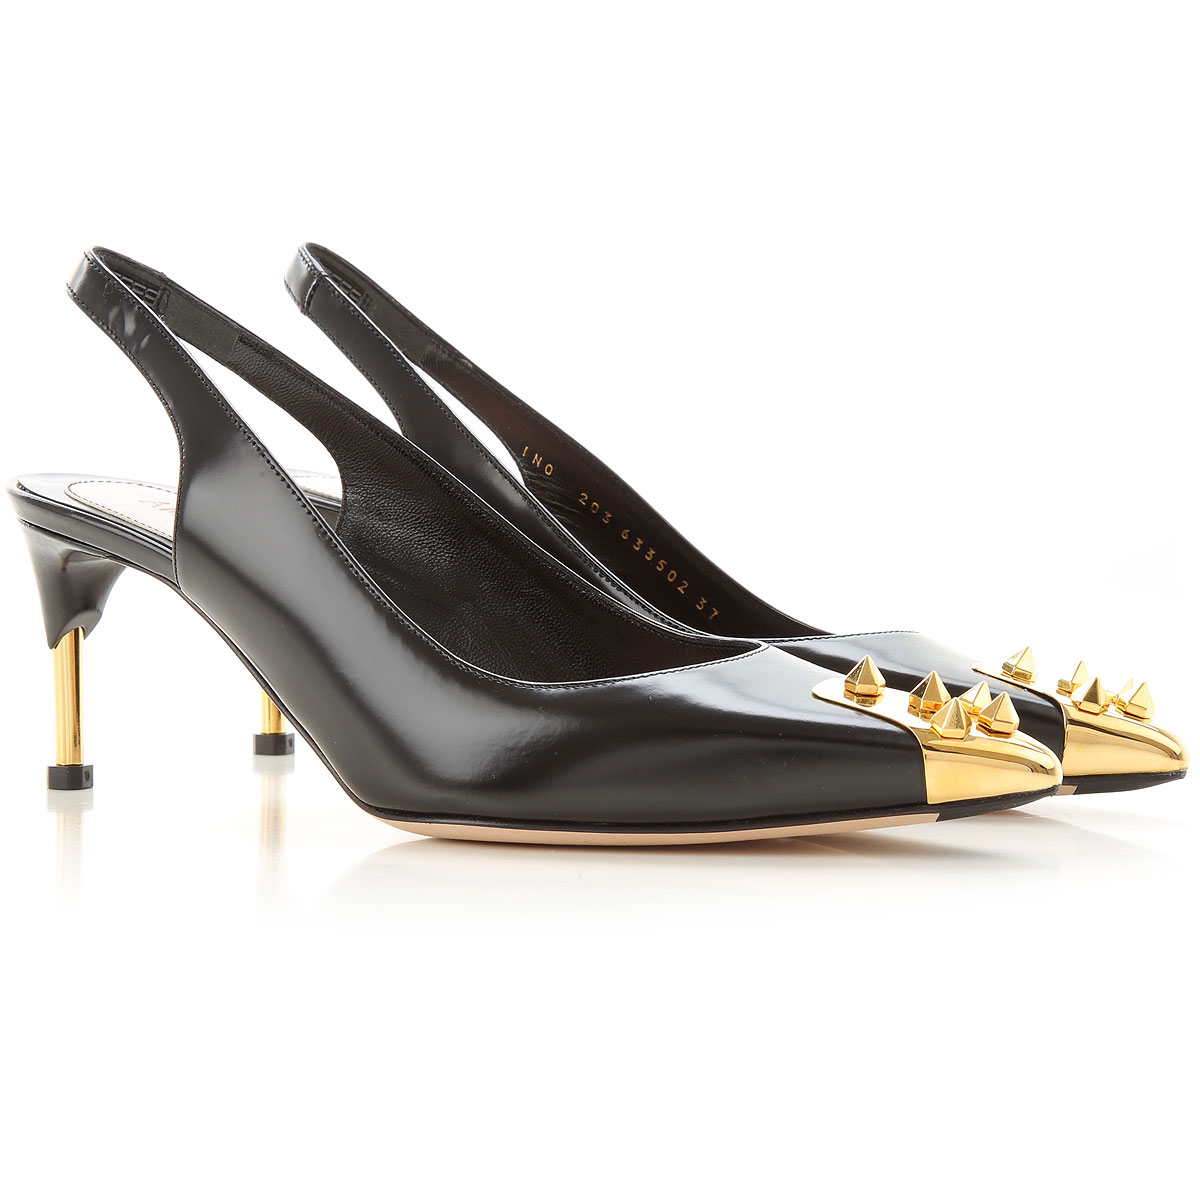 Womens Shoes Alexander McQueen, Style code: 633502-whv7d-1088